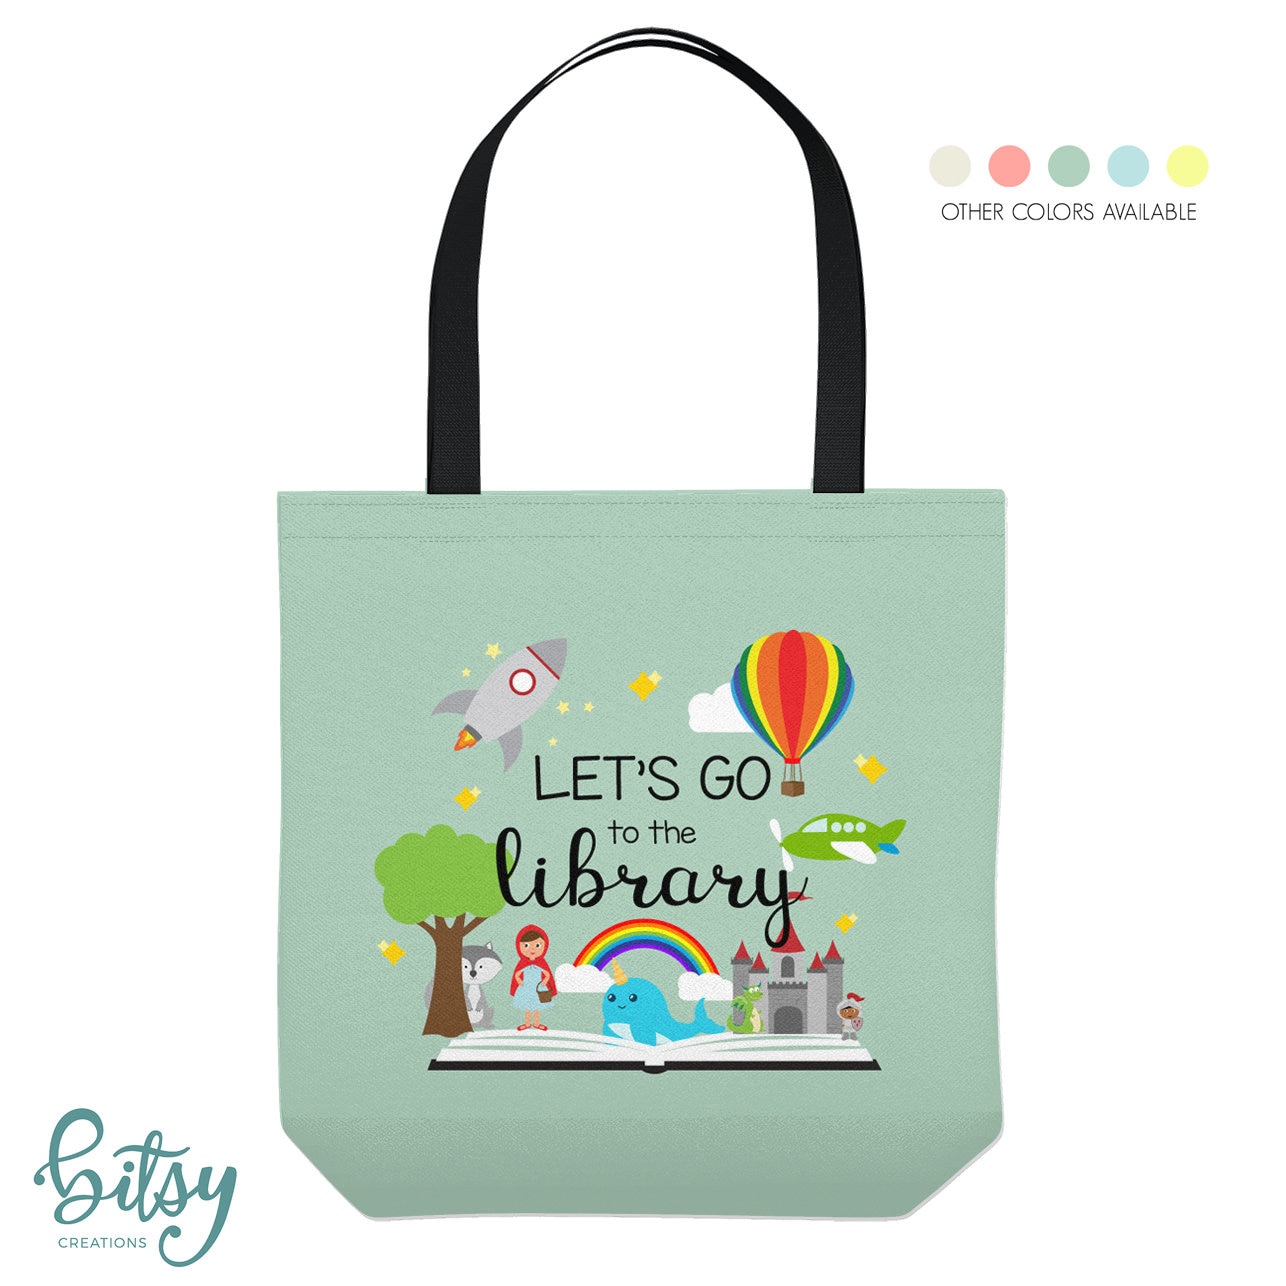 New Retro Creative Design Personalized Quilted Pattern PU Tote Bag